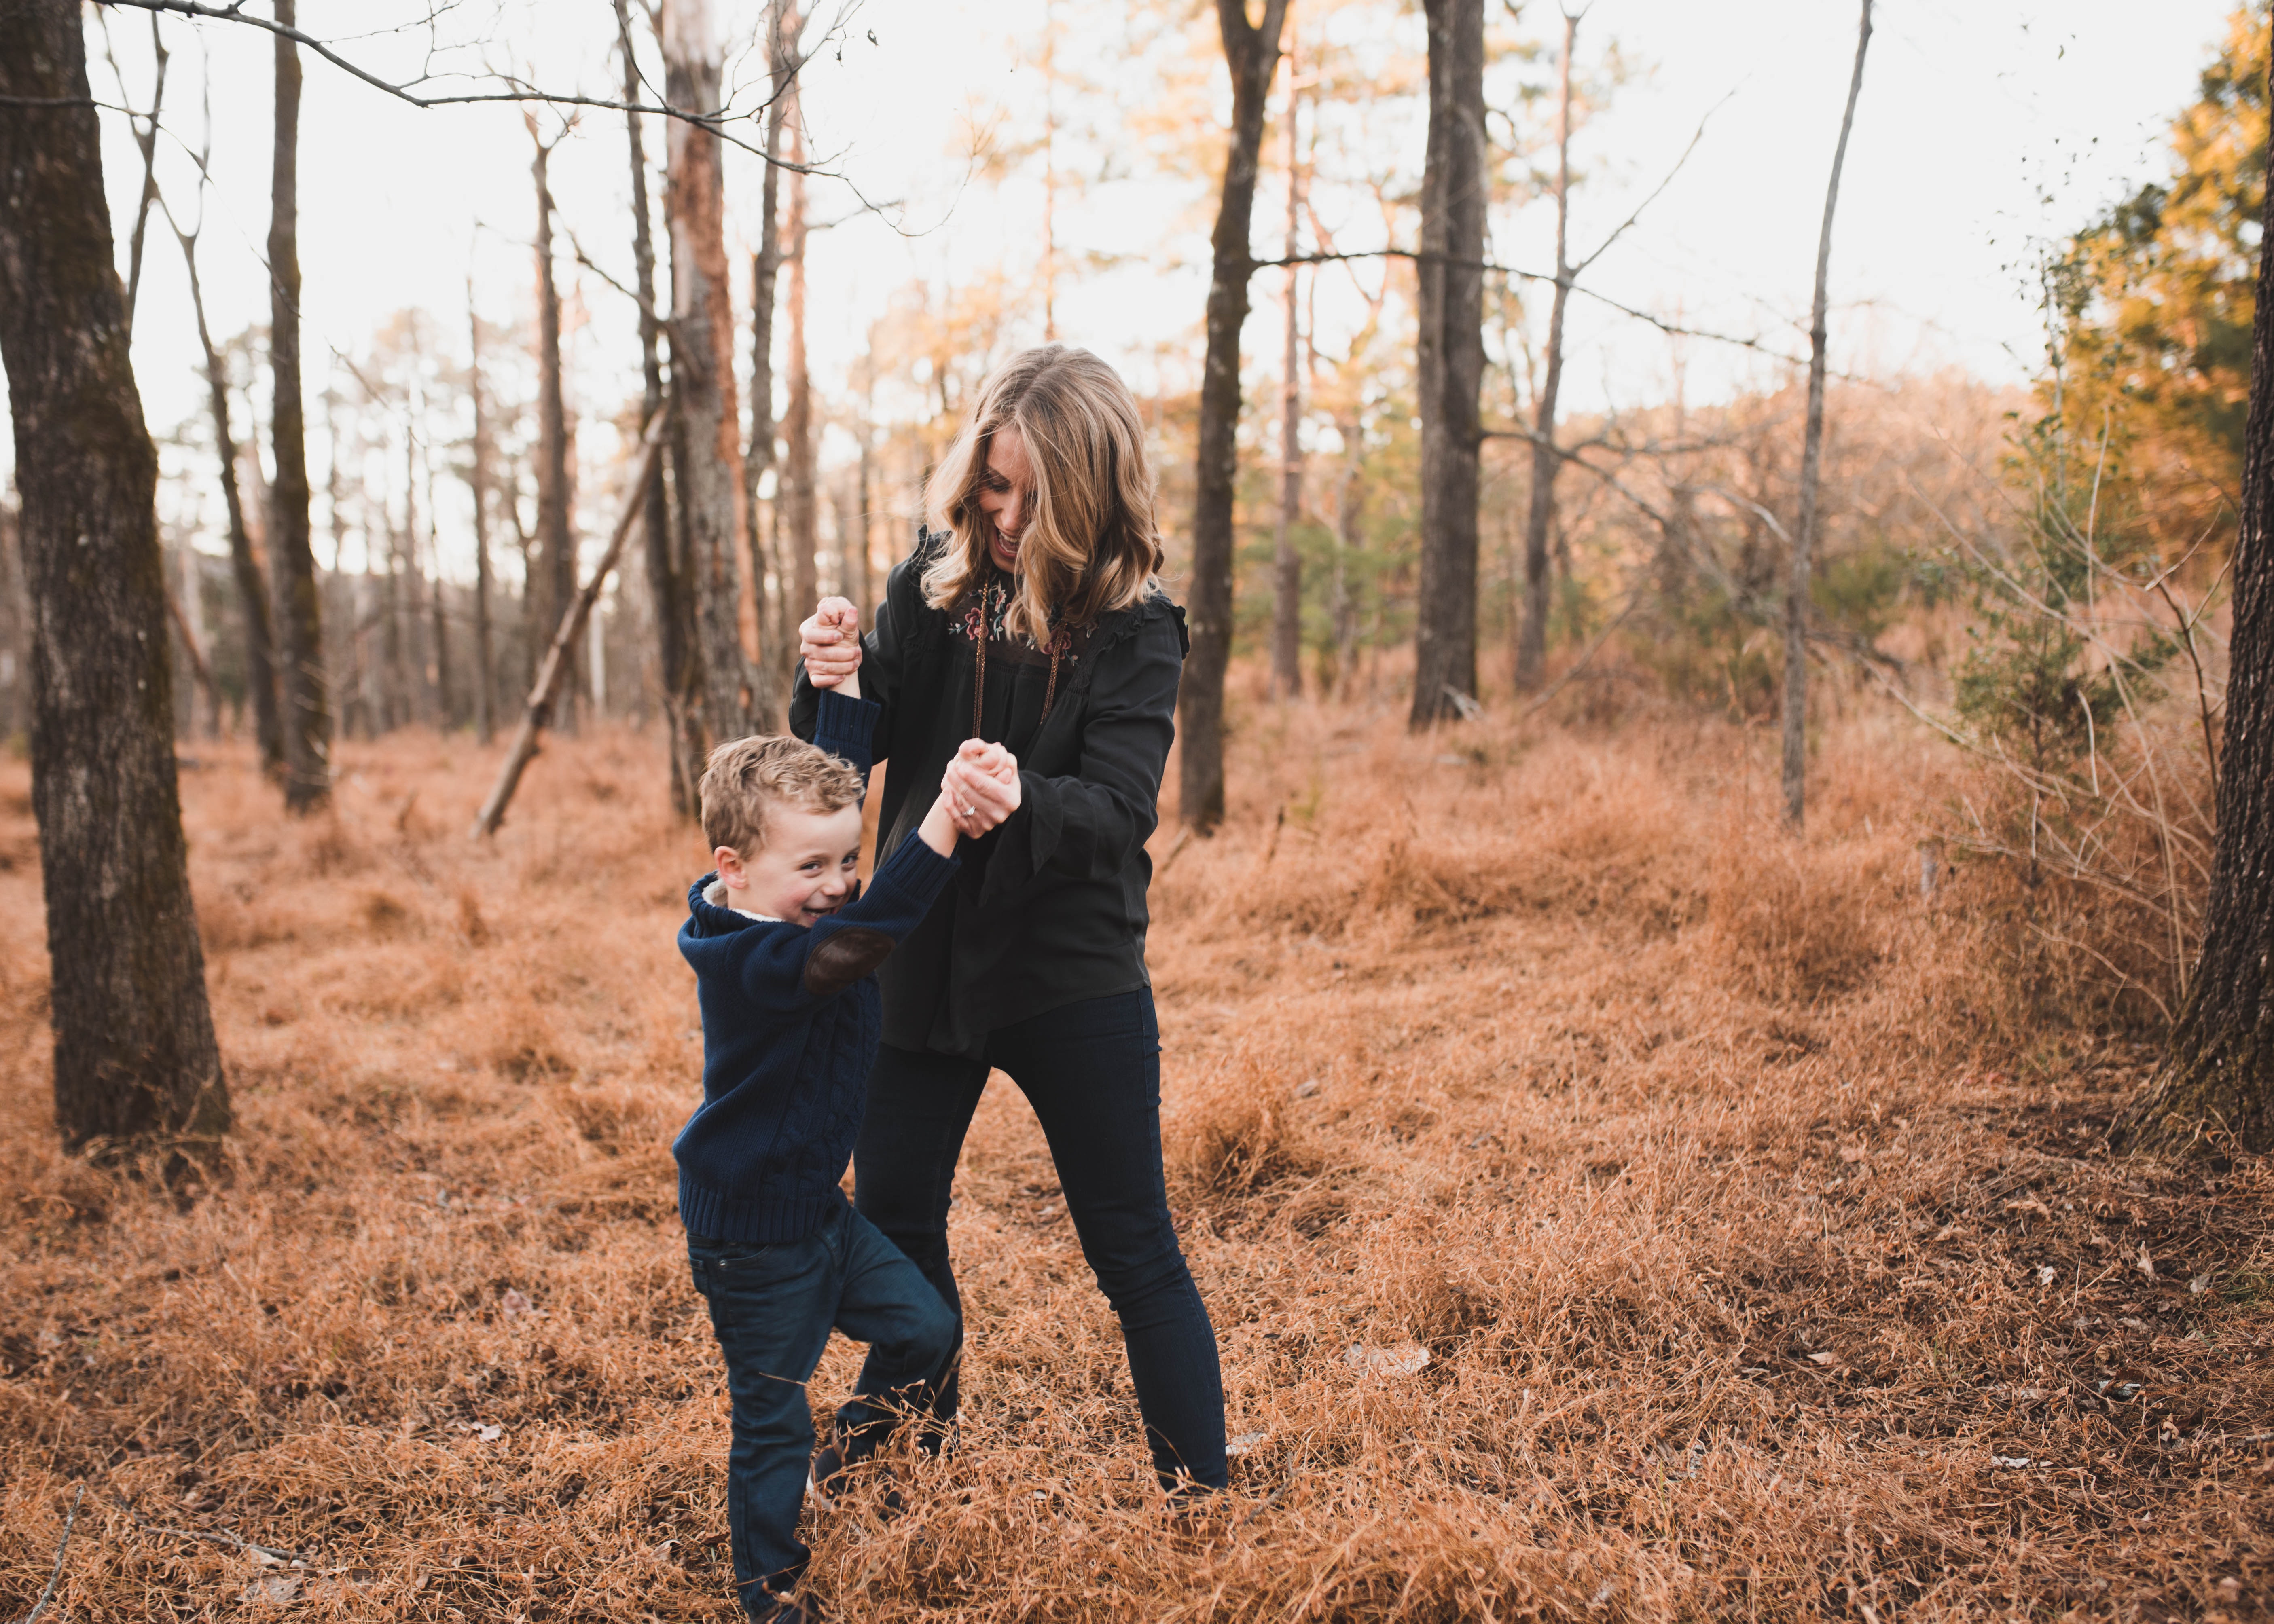 Woman Wearing Black Jacket Playing With Young Boy, Adorable, Kid, Woman, Trees, HQ Photo